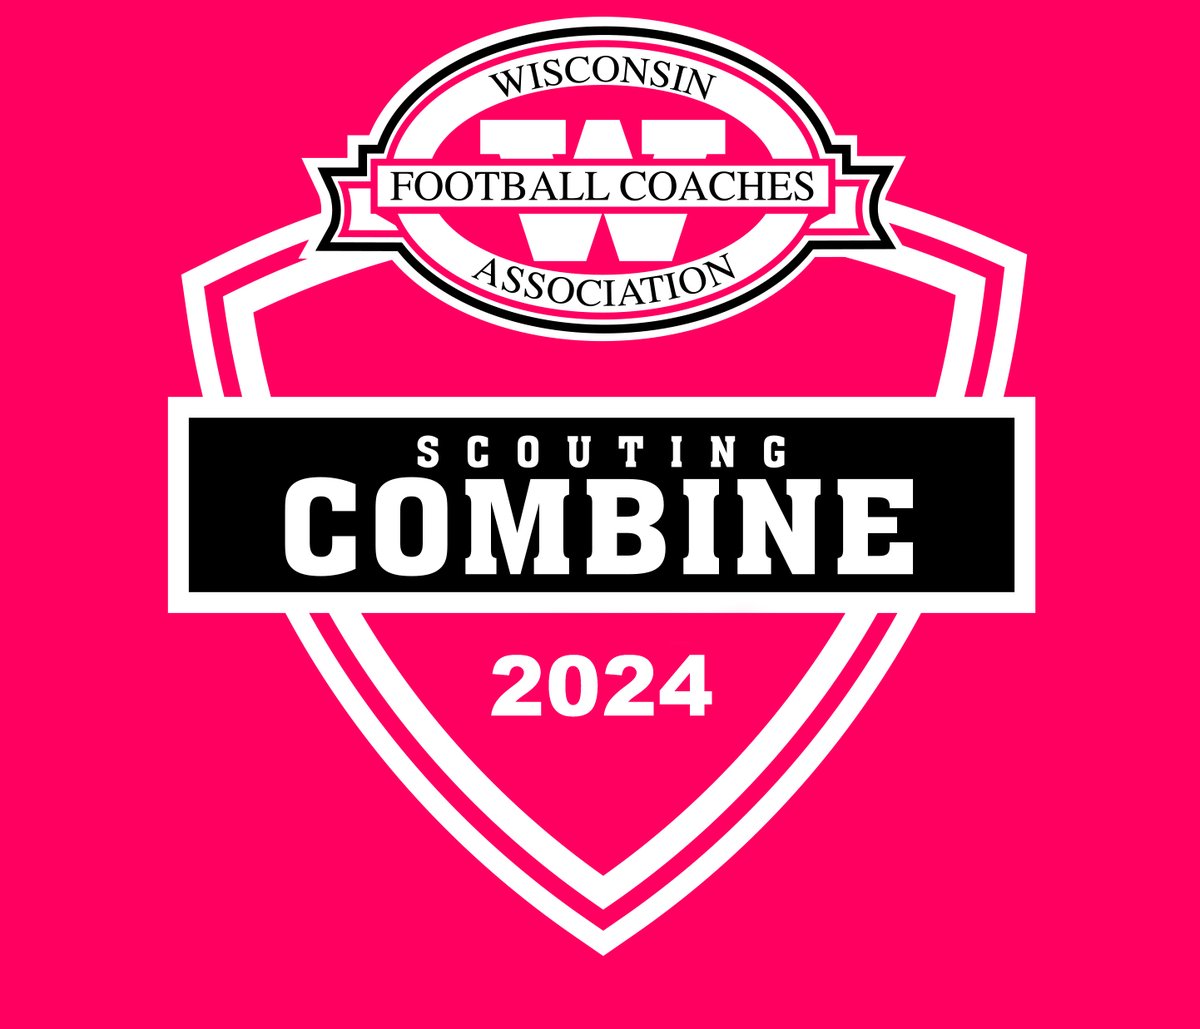 The WFCA Combine was held yesterday at NX Level in Waukesha. The full results, recap, and top performers from @travisWSN are now available. wifca.org/news_article/s…